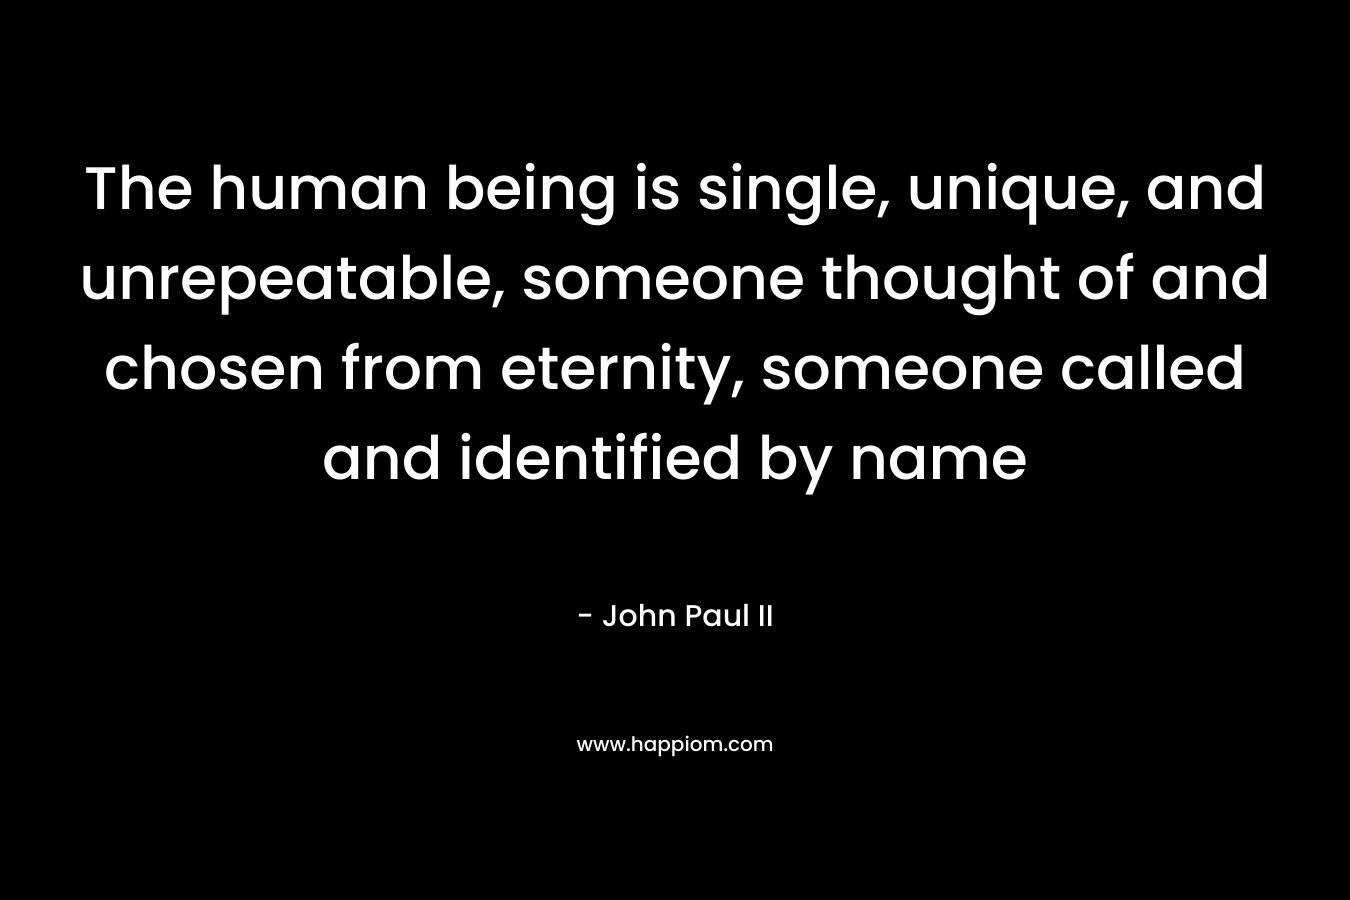 The human being is single, unique, and unrepeatable, someone thought of and chosen from eternity, someone called and identified by name – John Paul II